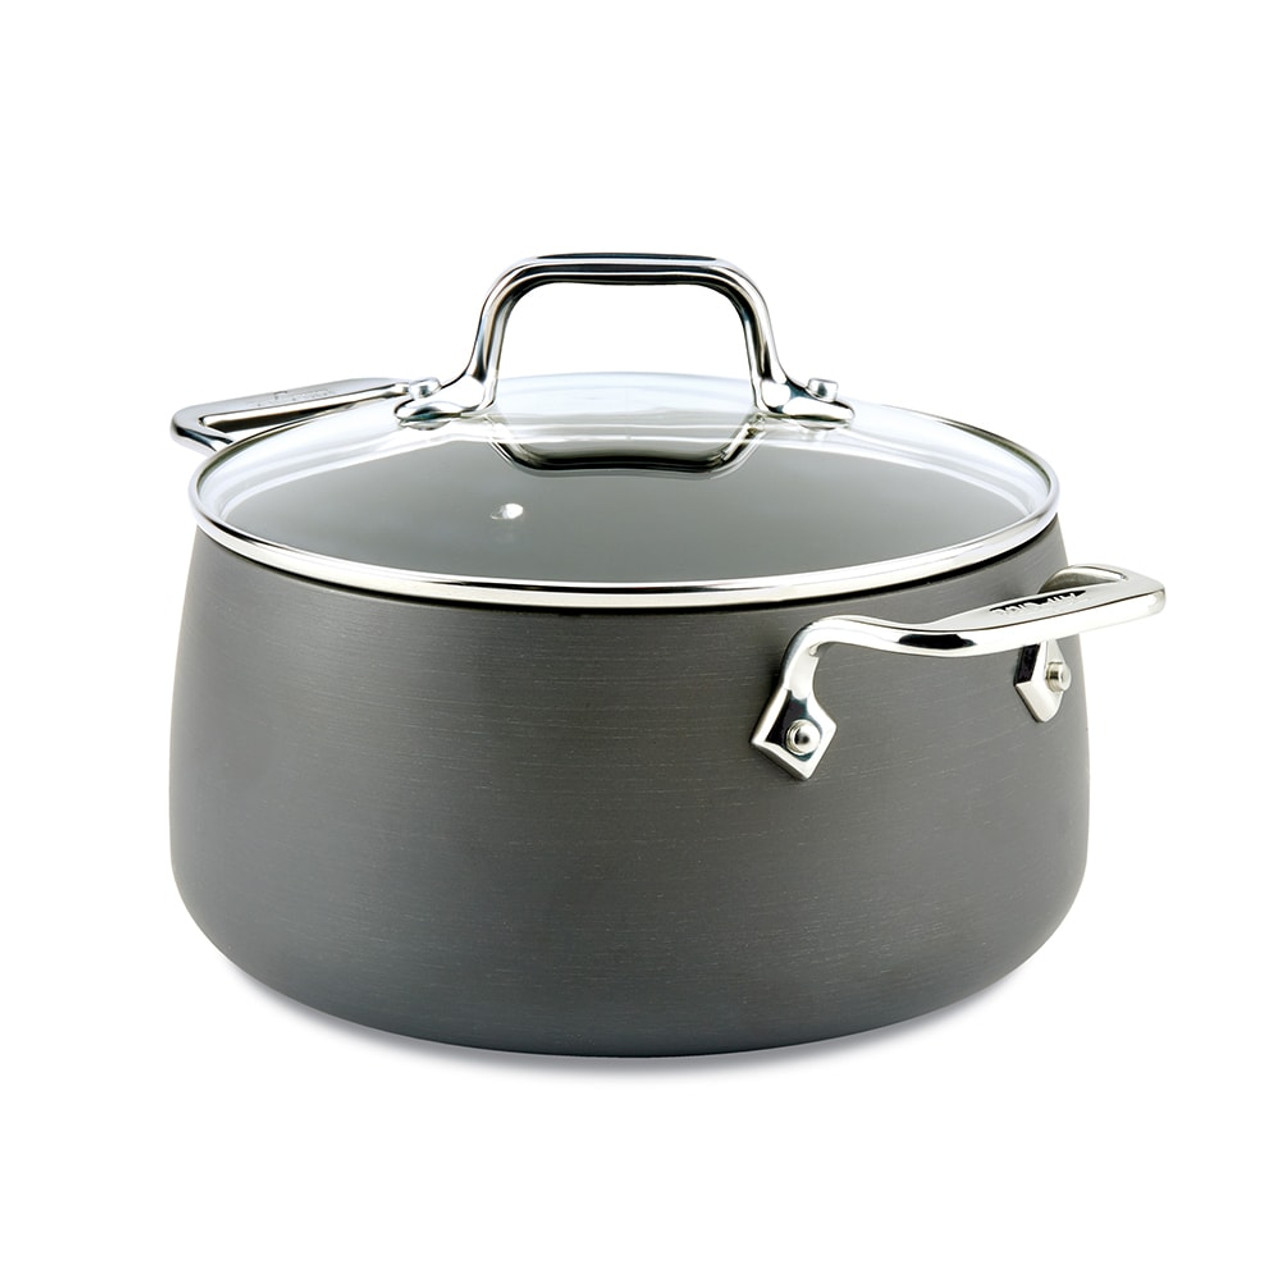 https://cdn11.bigcommerce.com/s-hccytny0od/images/stencil/1280x1280/products/519/8413/all-clad-ha1-soup-pot__95828.1576080481.jpg?c=2?imbypass=on